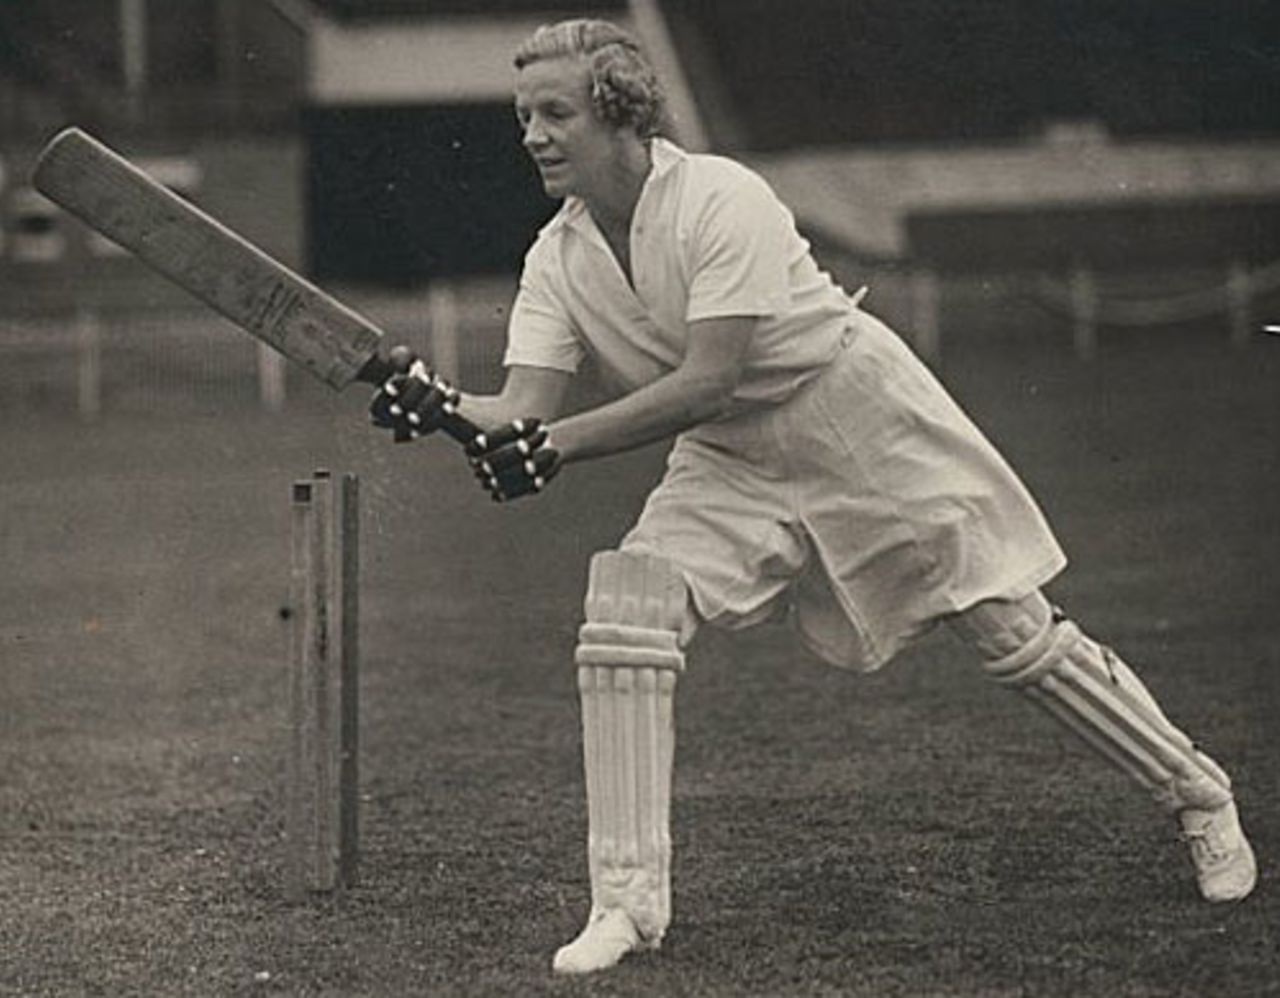 Joy Partridge during England's tour of Australia and New Zealand in 1934-35